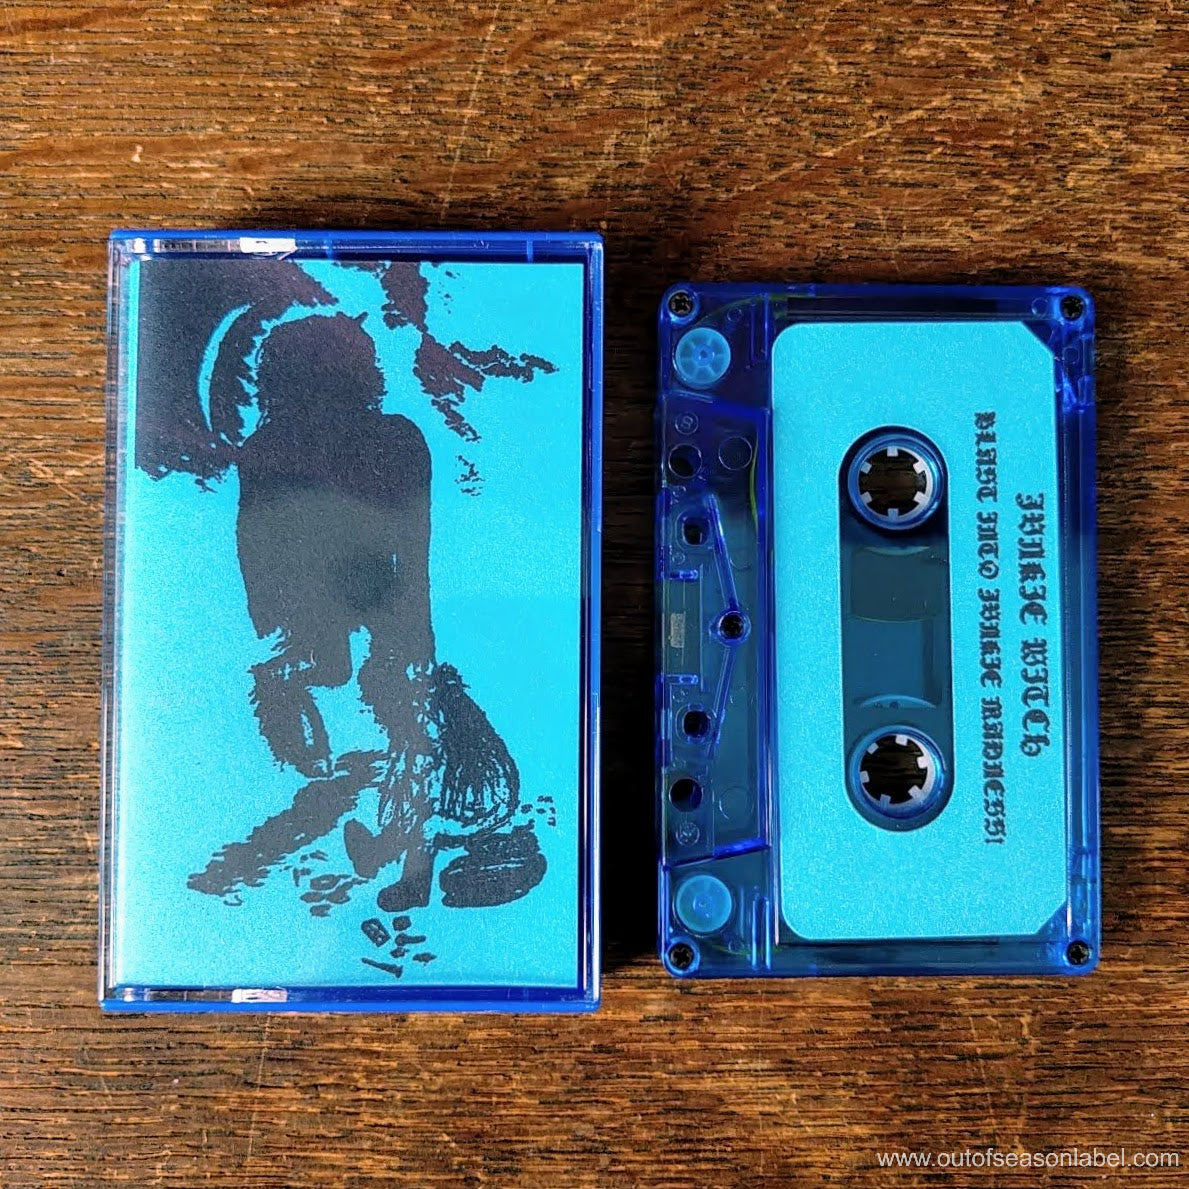 [SOLD OUT] JUNKIE WITCH "Blast into Junkie Madness!" Cassette Tape